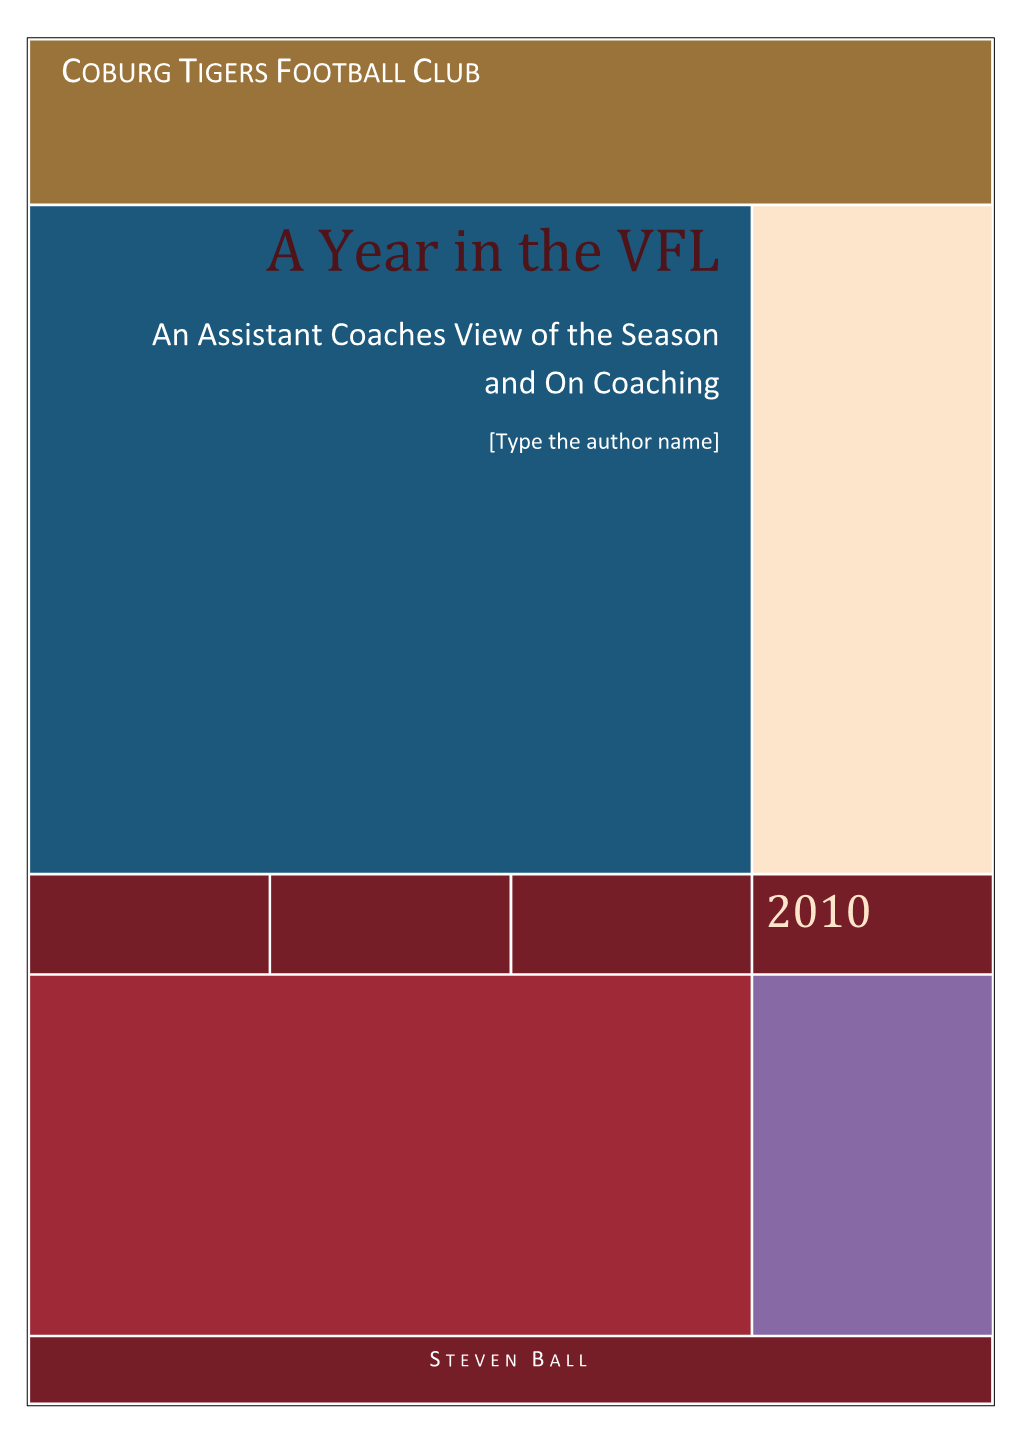 A Year in the VFL